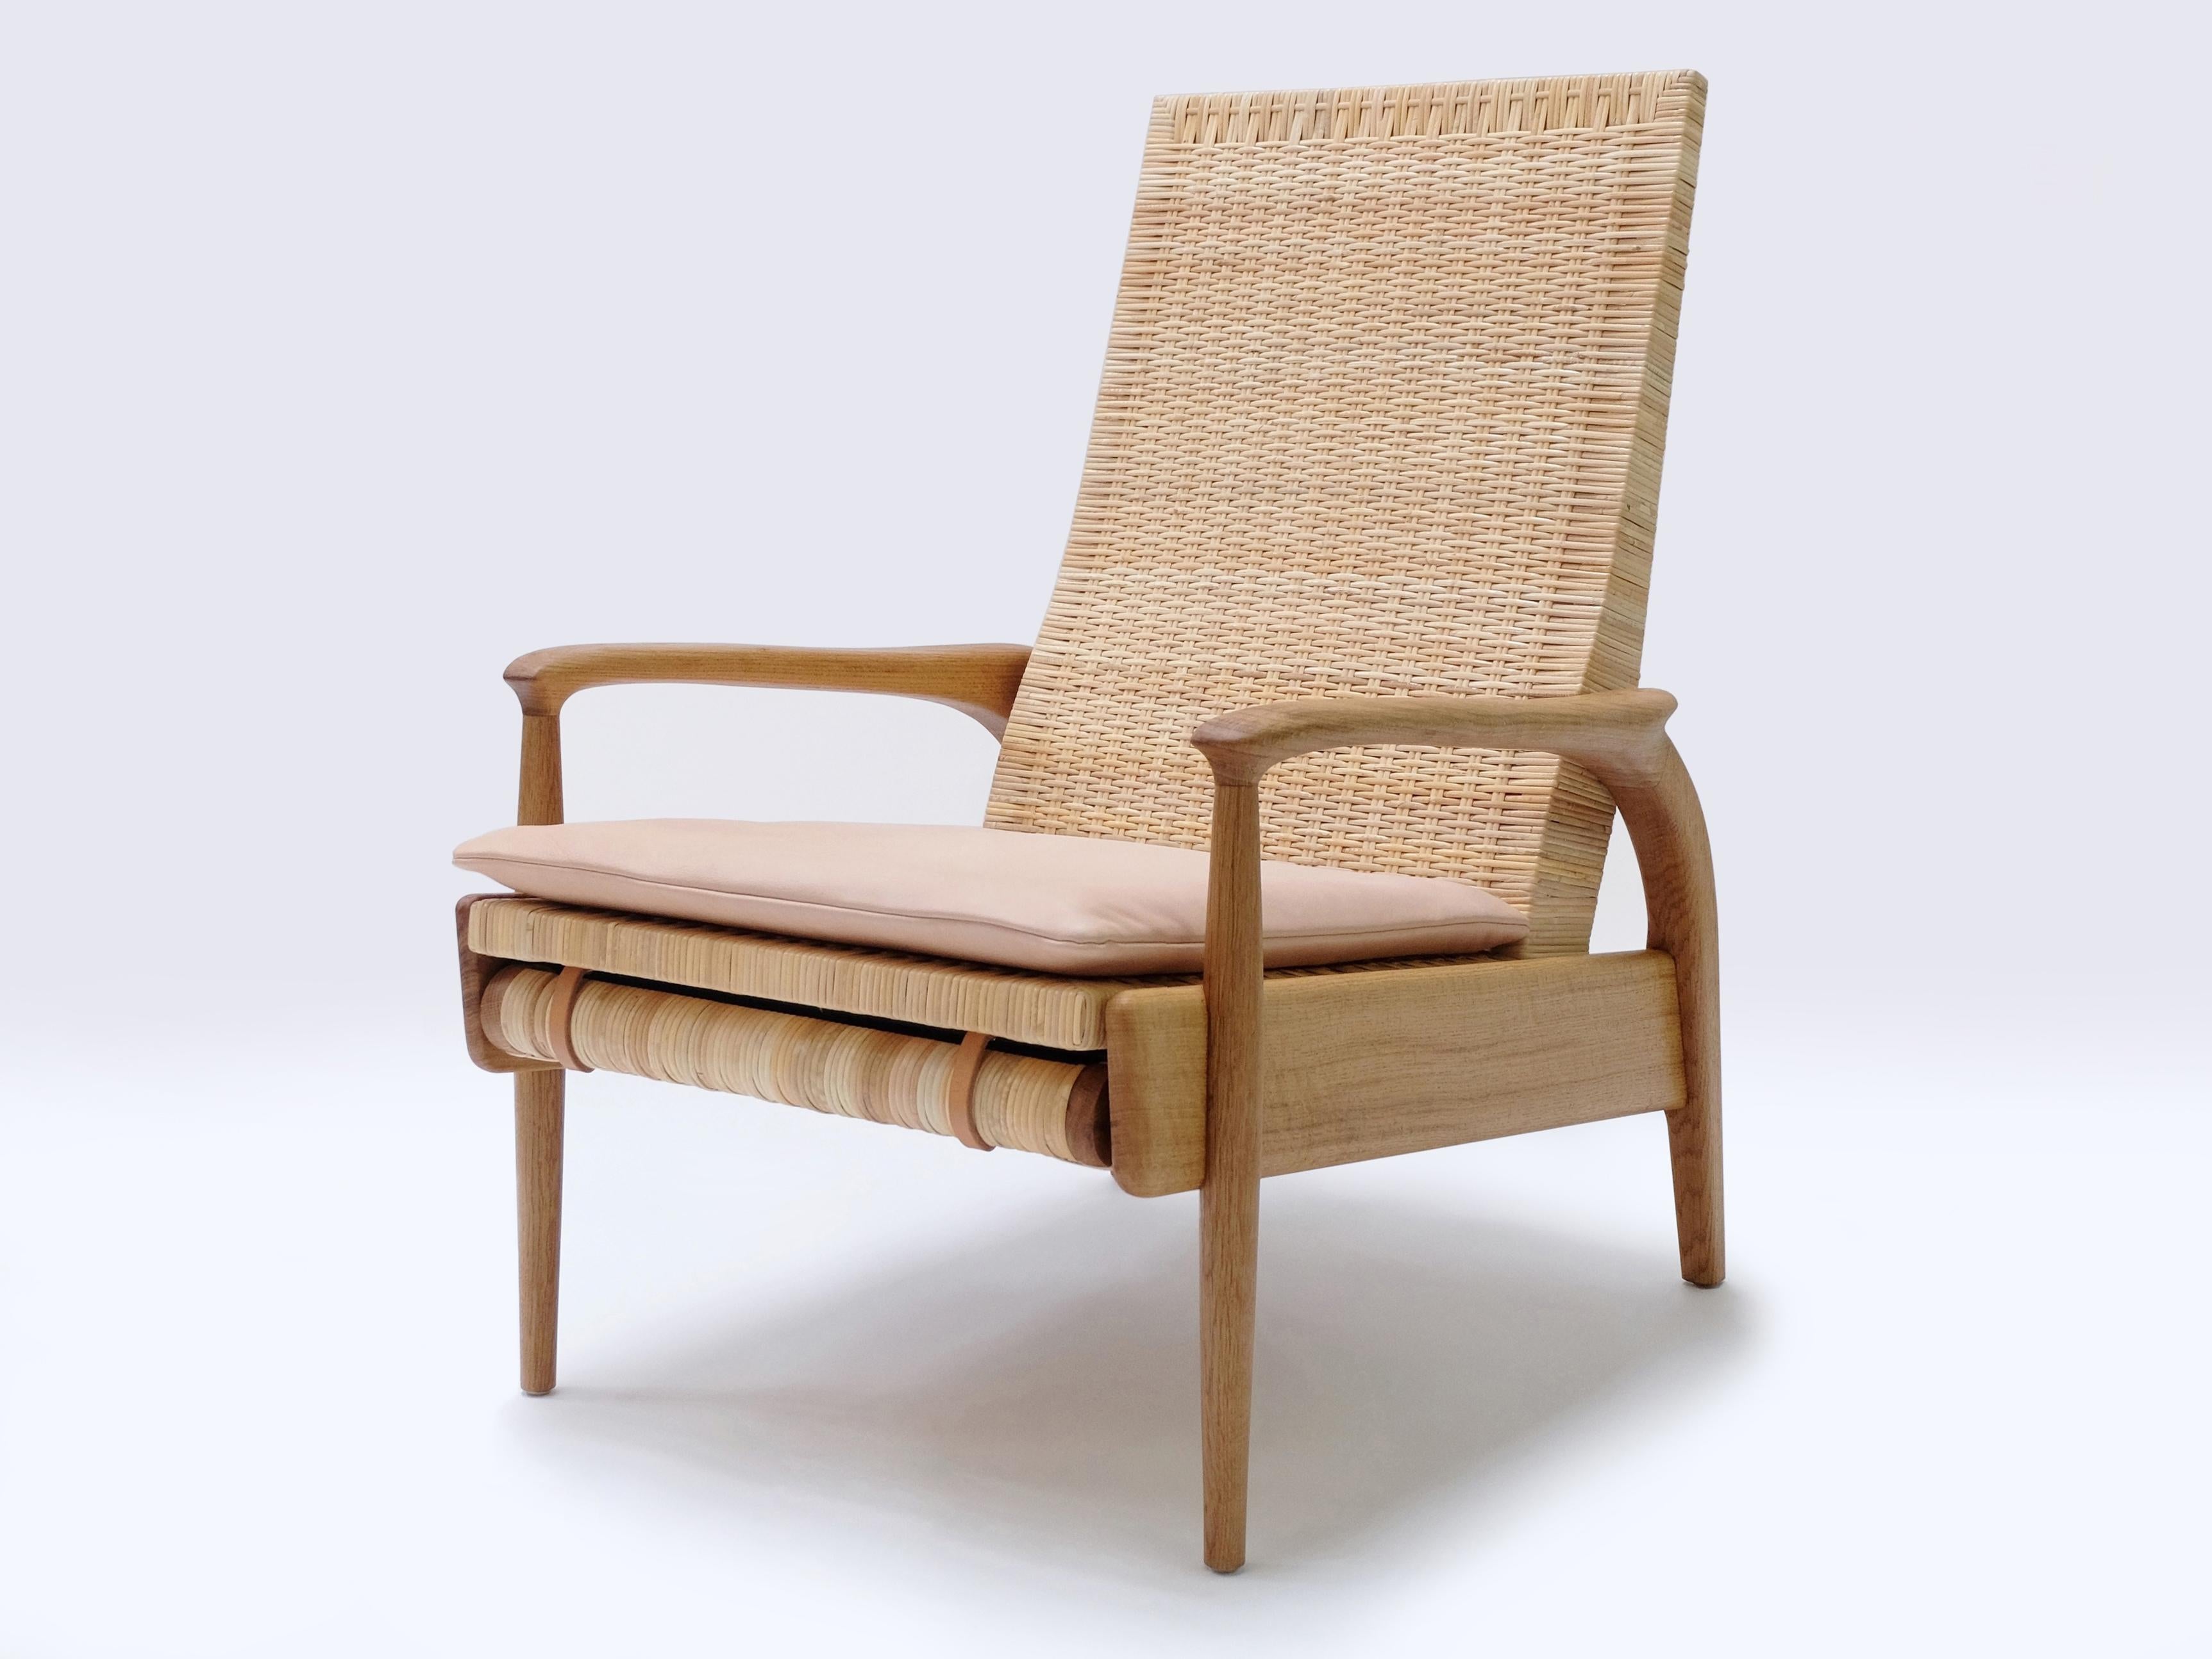 English Pair of Reclining Armchairs, Solid Oak, Handwoven Natural Cane, Leather Cushions For Sale